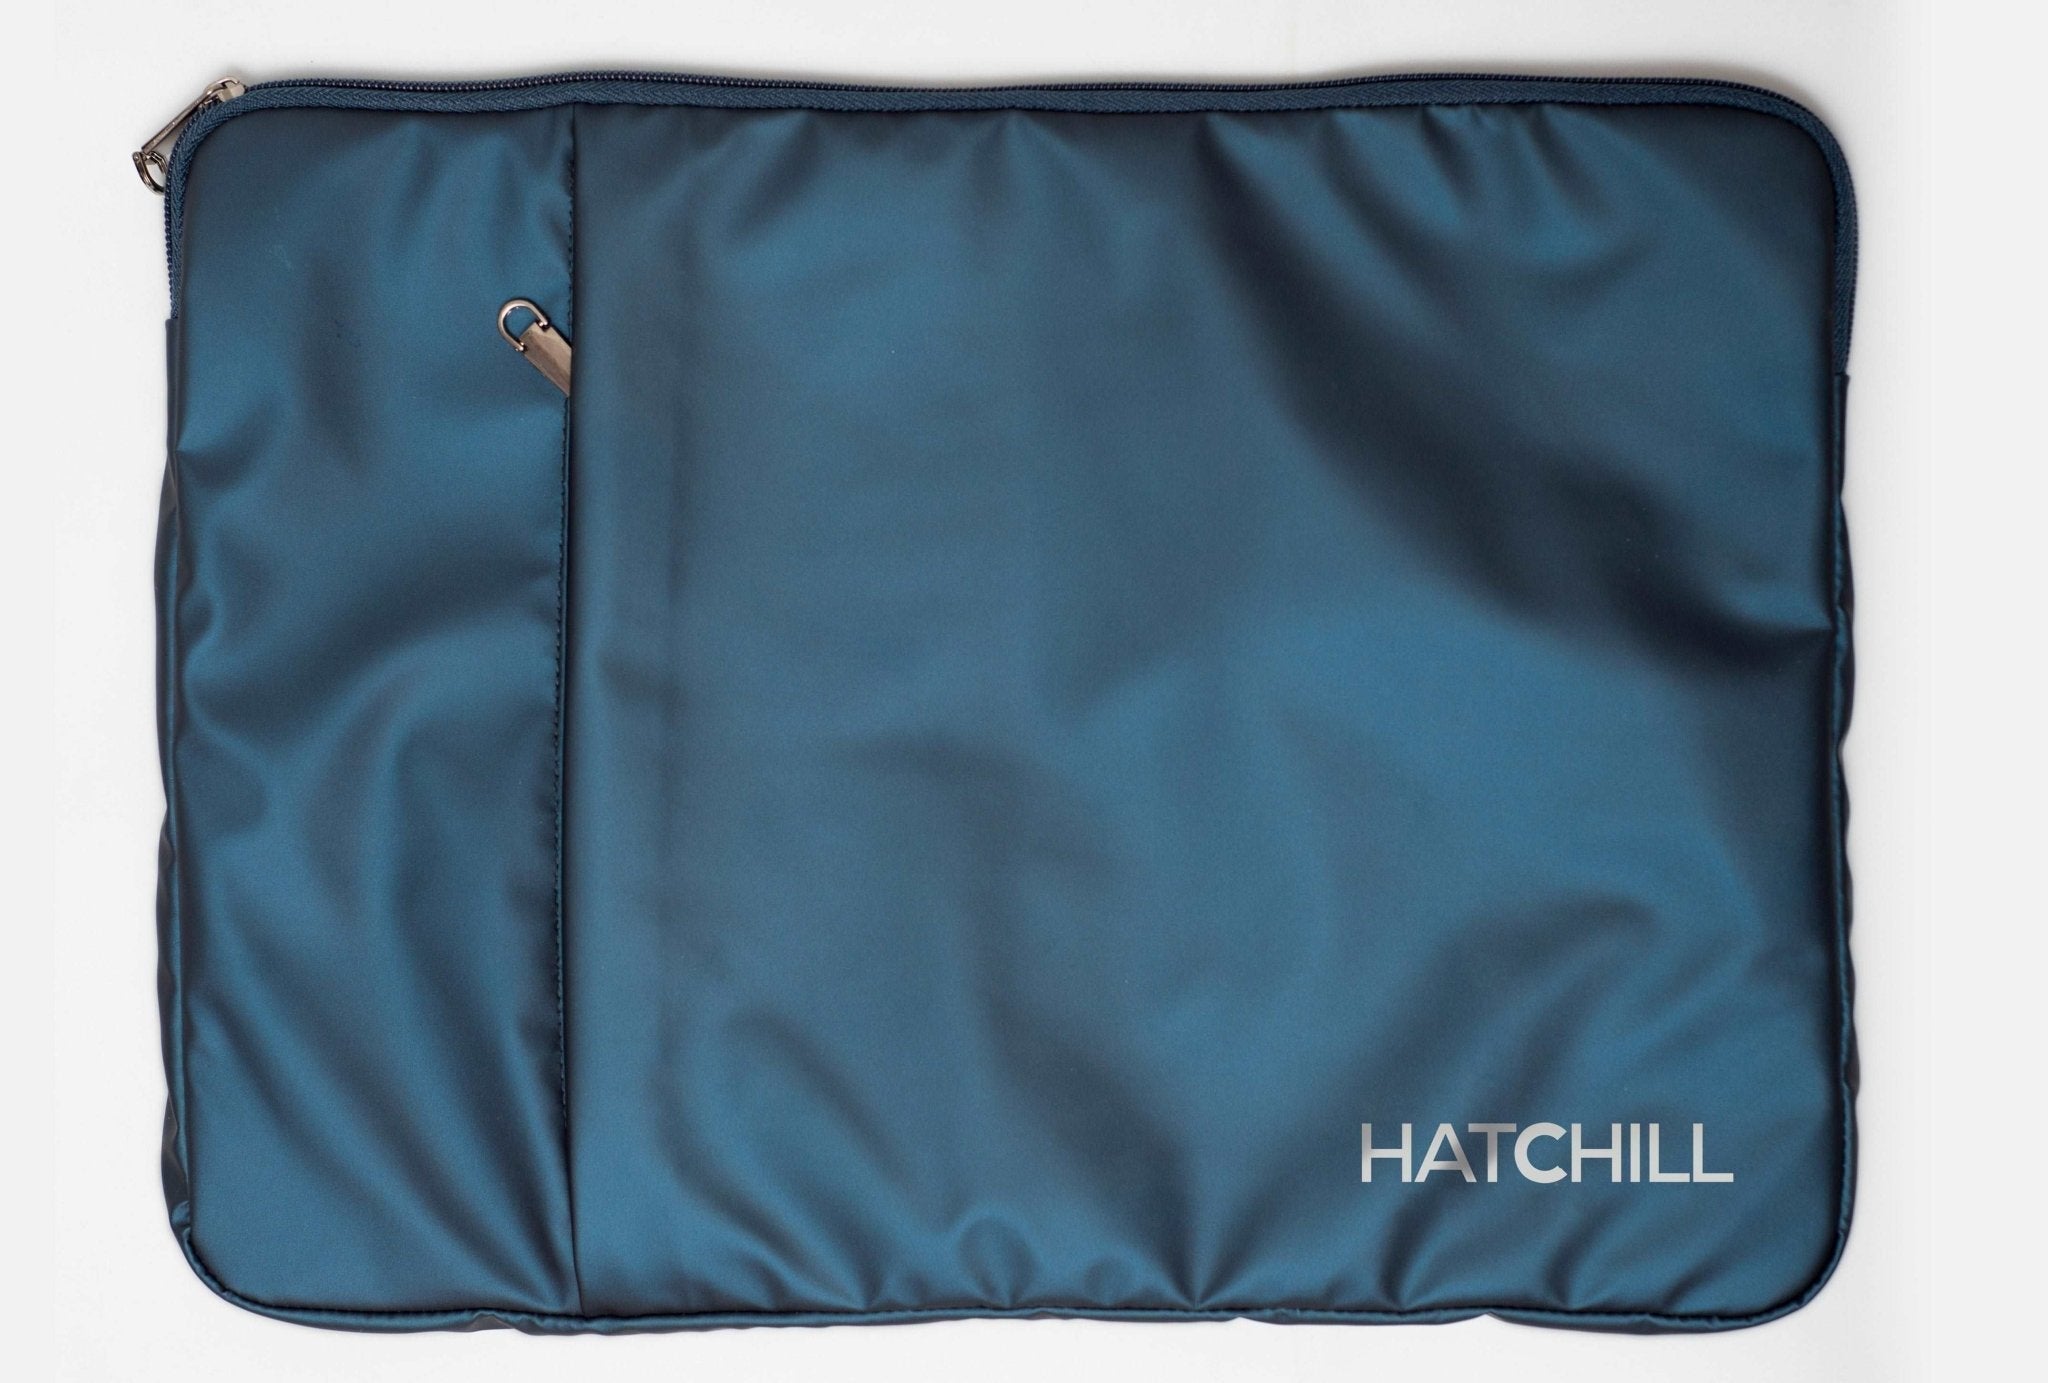 The Navy Business Laptop Sleeve 15.6 inch - Hatchill